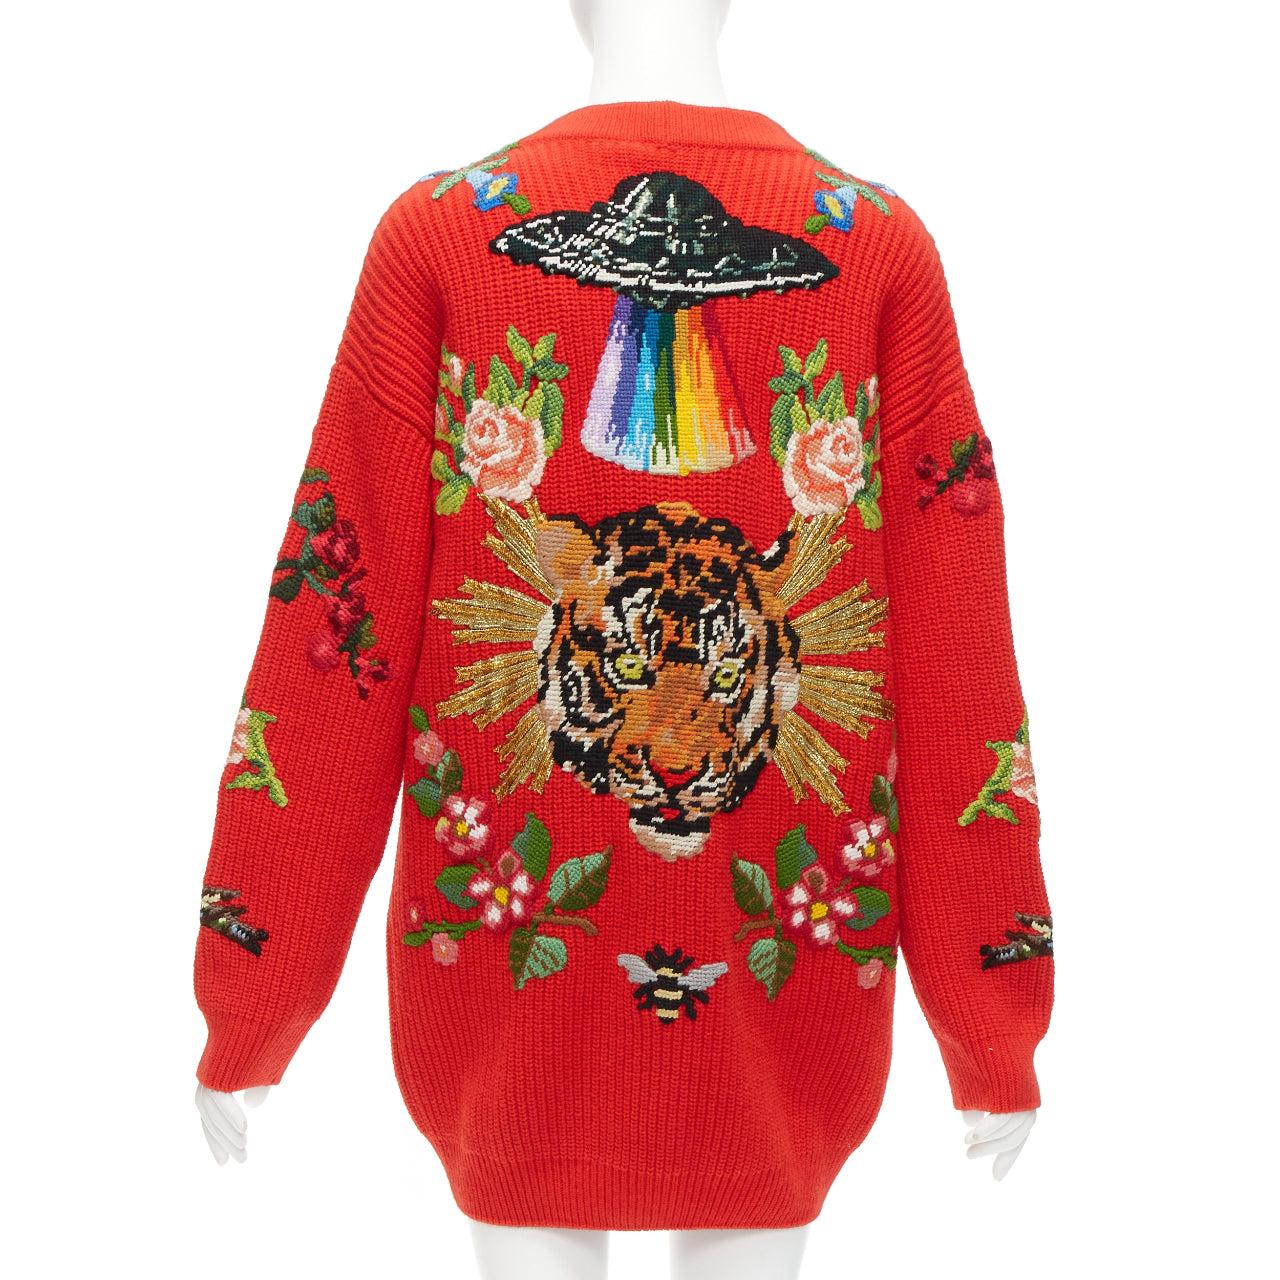 GUCCI Alessandro Michele red wool rabbit embroidery patch oversized cardigan S
Reference: LNKO/A02253
Brand: Gucci
Designer: Alessandro Michele
Collection: Year of the Rabbit
Material: Wool
Color: Red, Multicolour
Pattern: Animal Print
Closure: